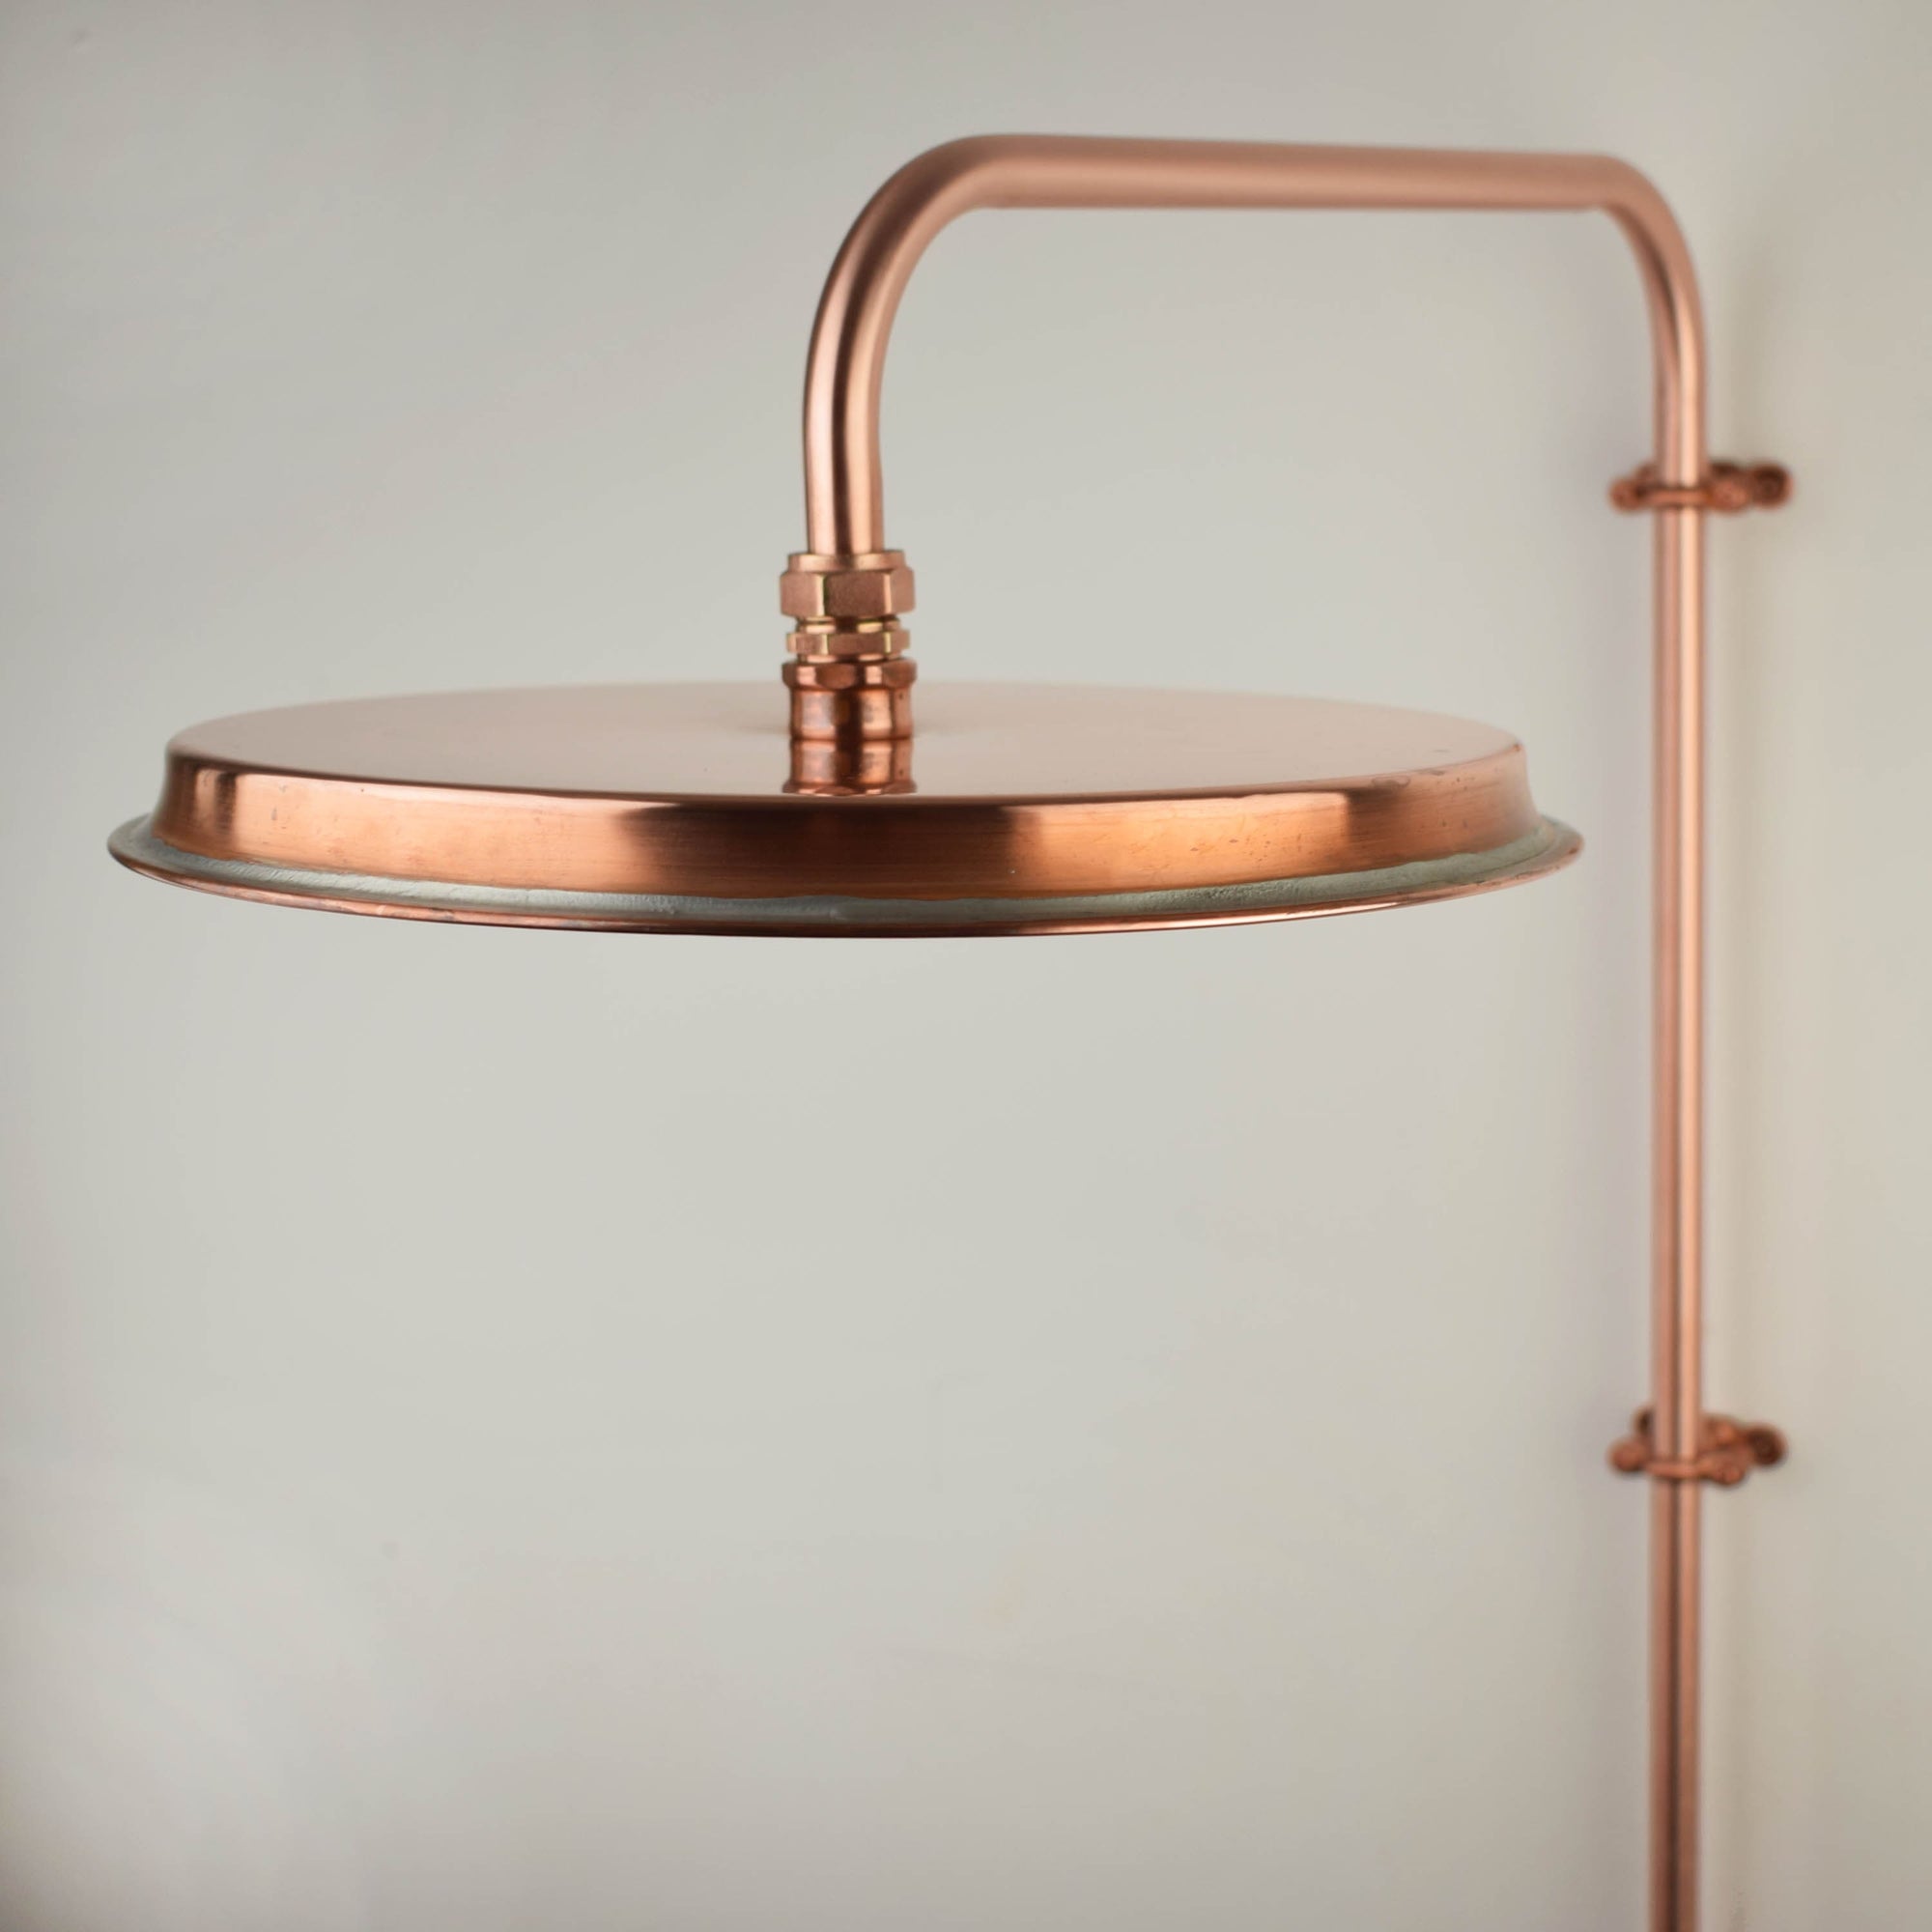 Add a touch of sophistication to your bathroom with this beautiful copper shower head, crafted with exquisite attention to detail and quality craftsmanship.